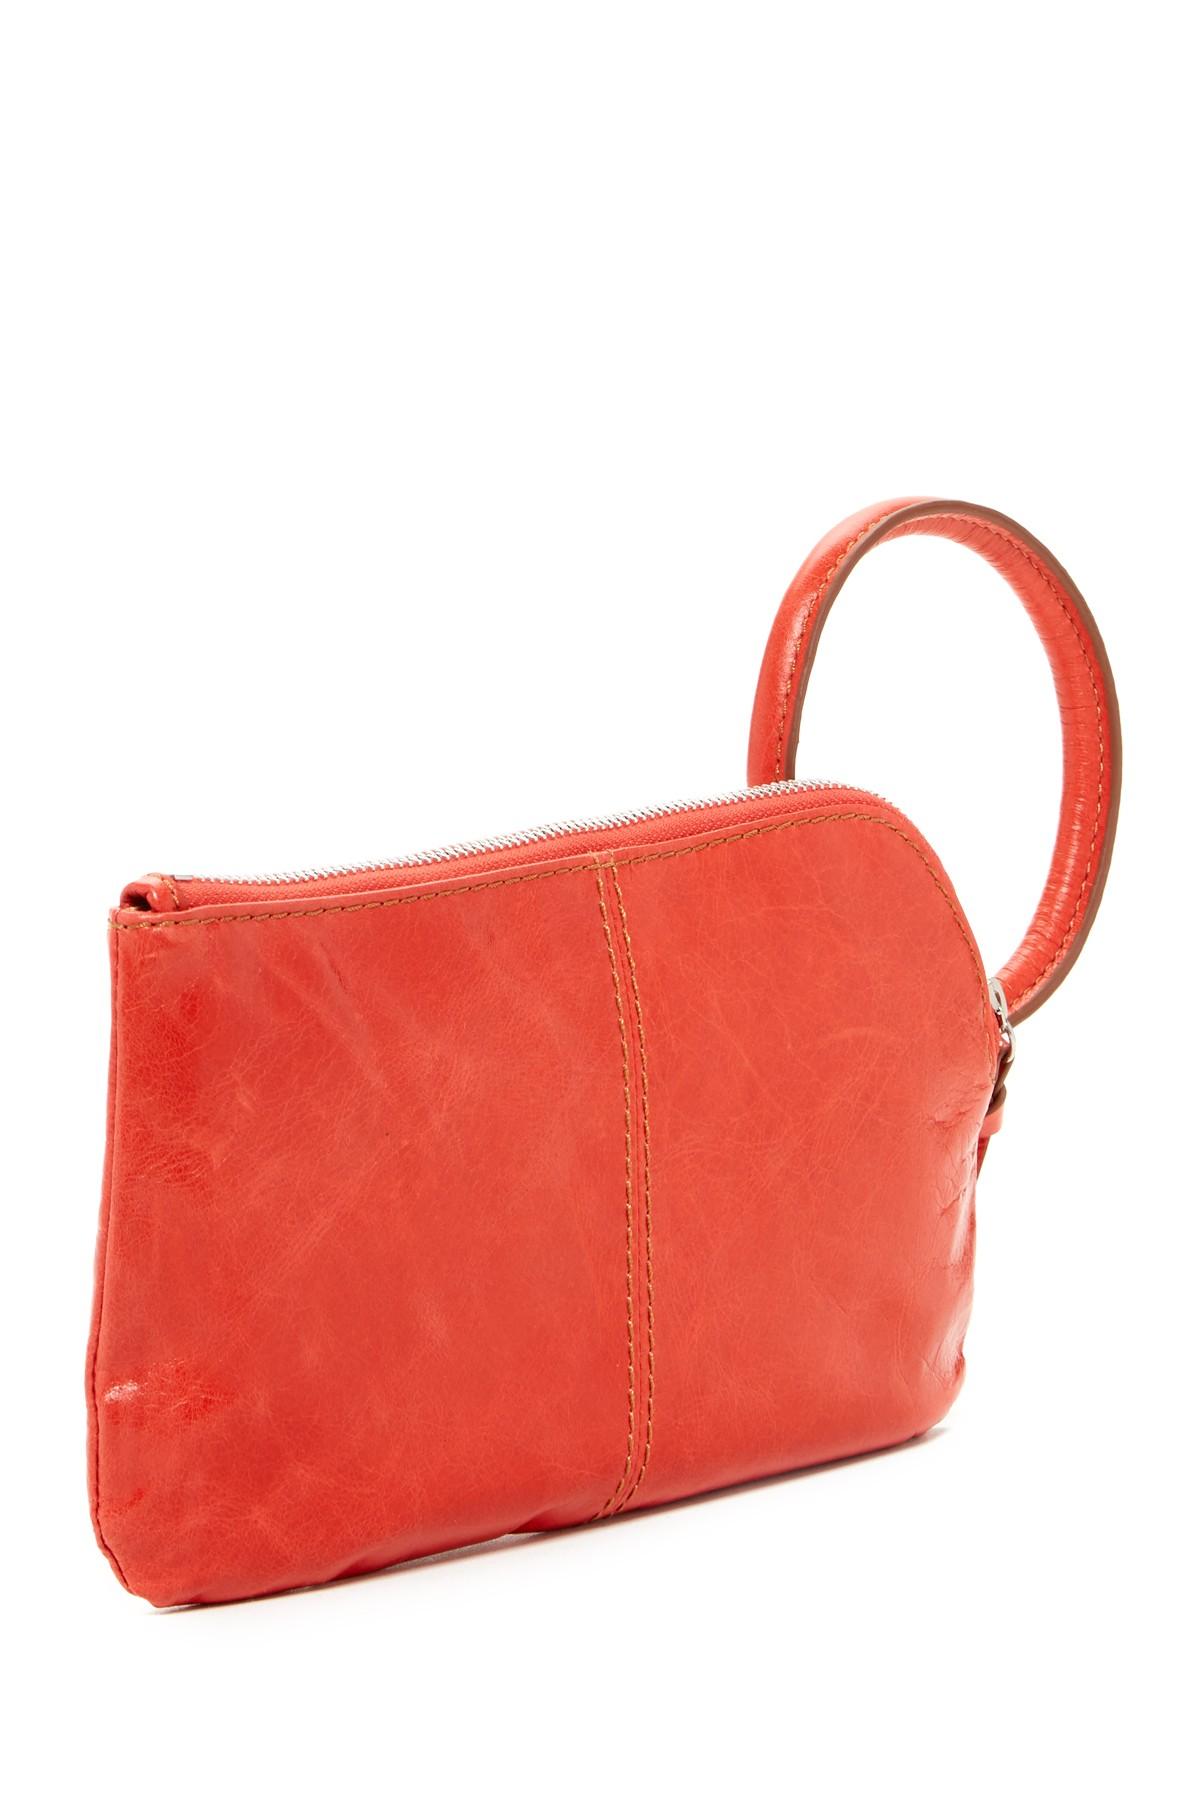 Hobo Sable Leather Clutch in Red - Lyst